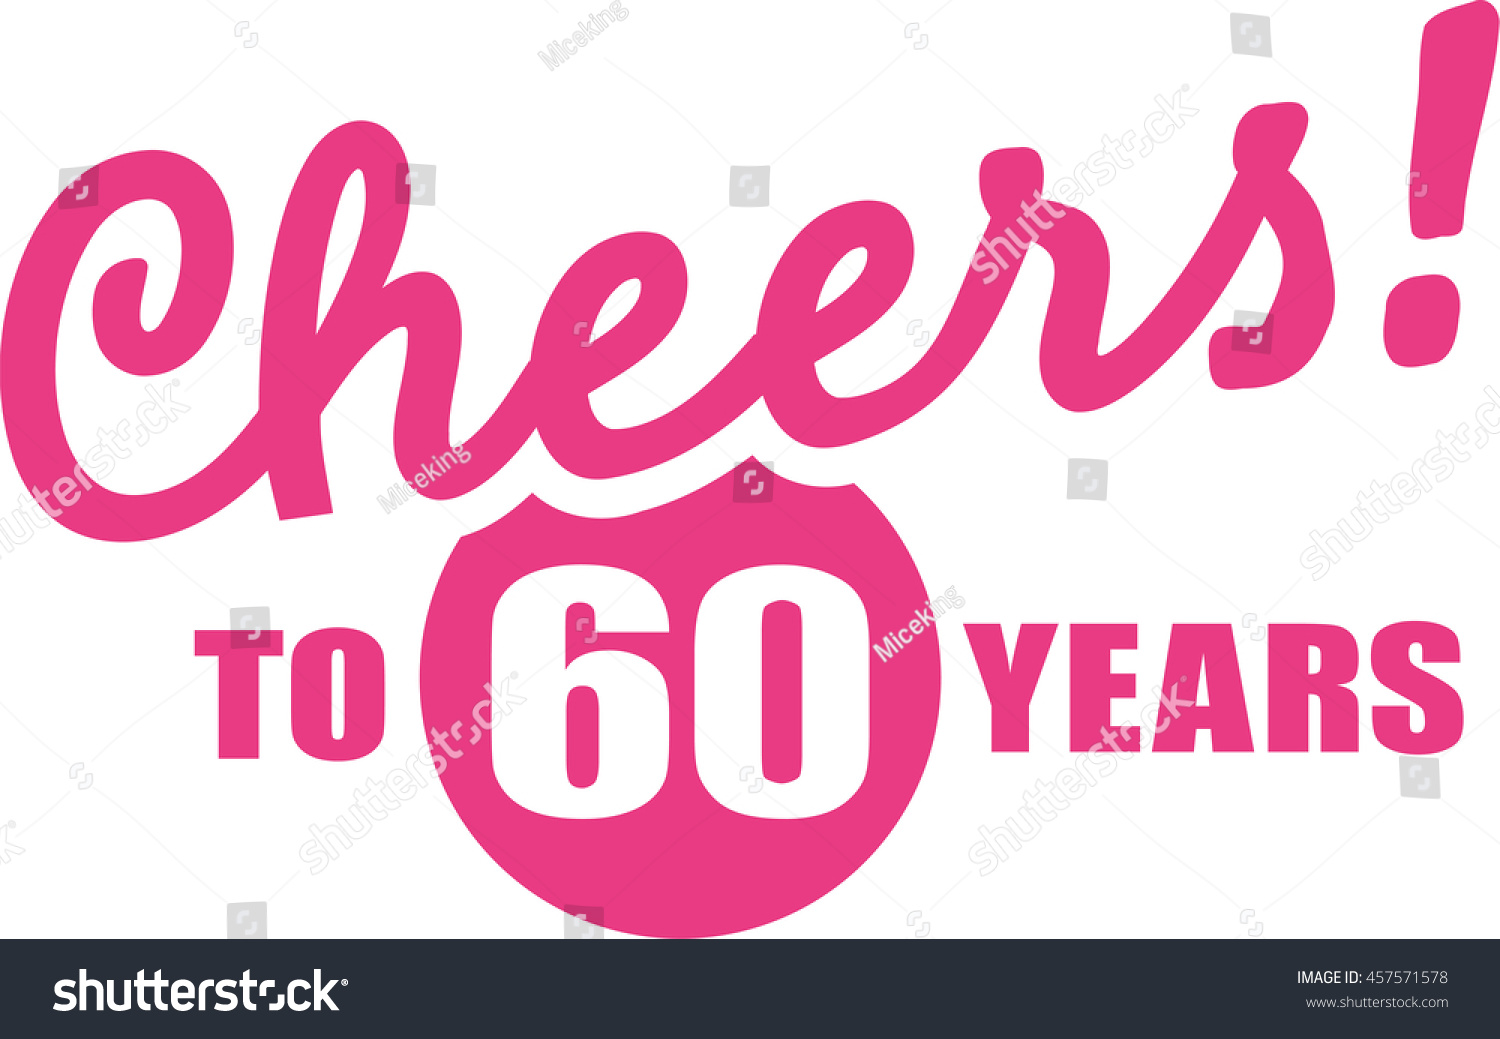 SVG of Cheers to 60 years - 60th birthday svg